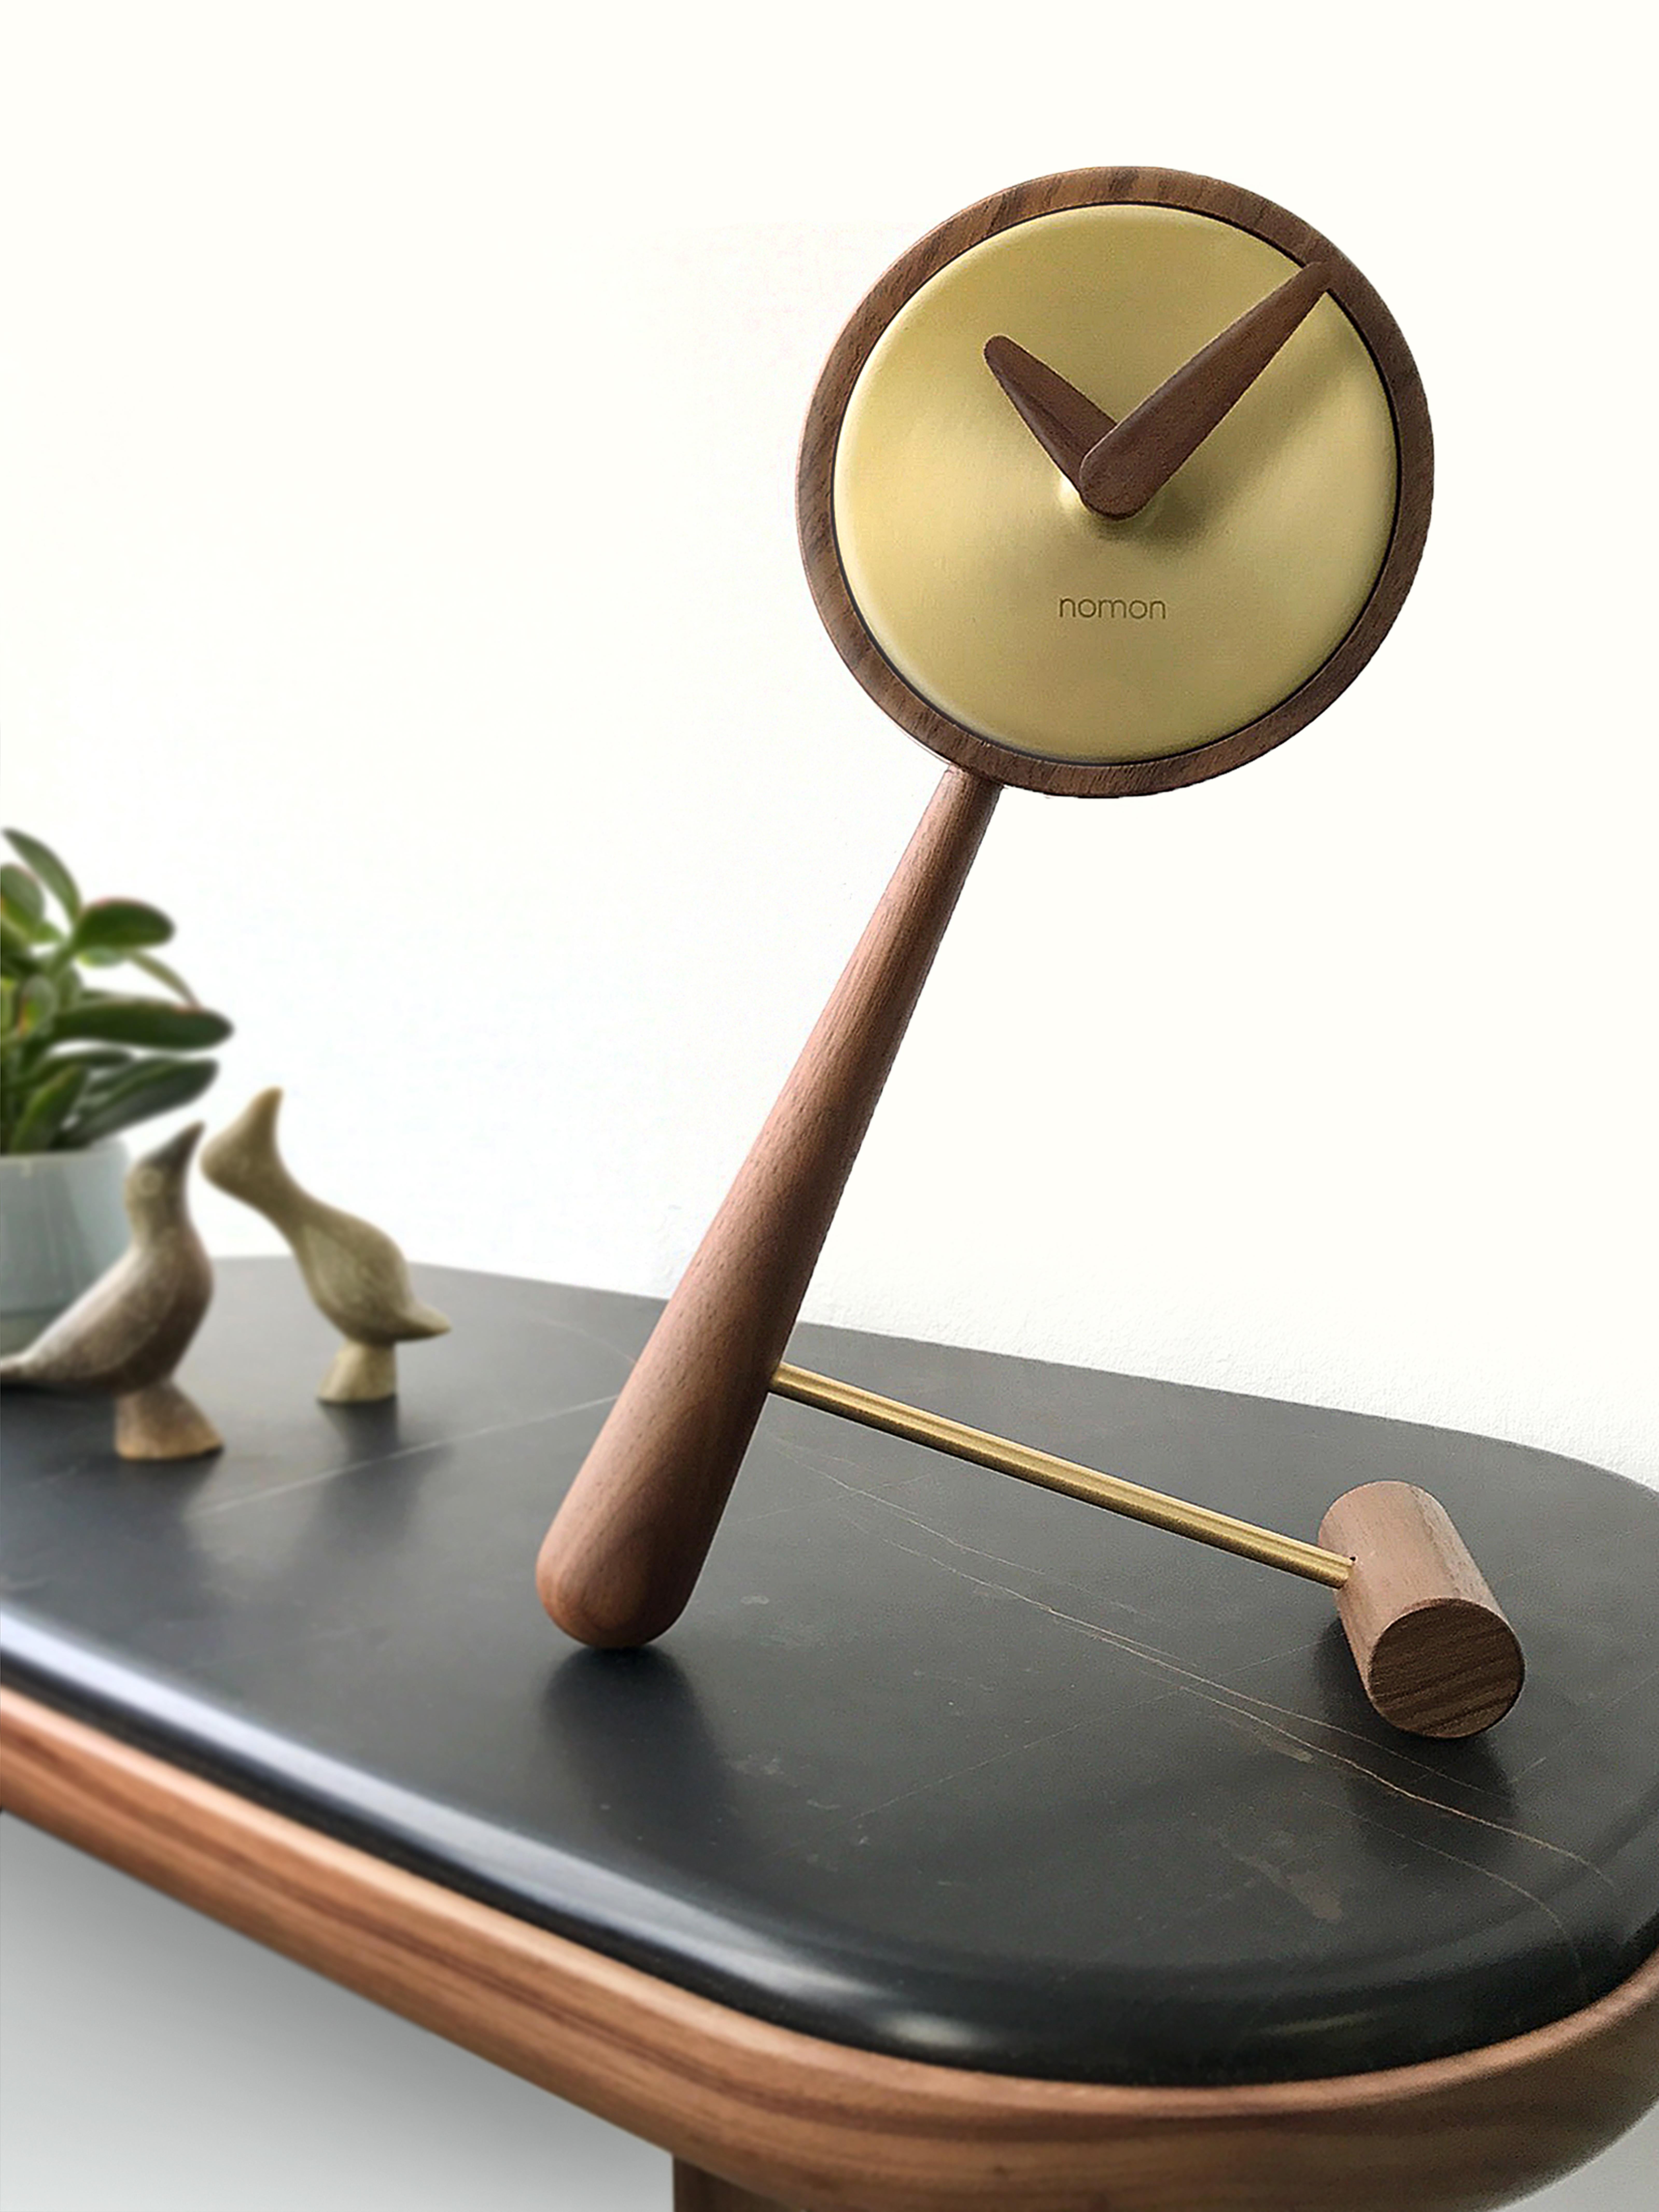 Átomo clocks, whose design reflects creativity with a great sense of refinement, dress the corners of tables and provide light and style.

ø10cm clock with natural walnut wood body, and polished brass or graphite finish central box.

Nomon